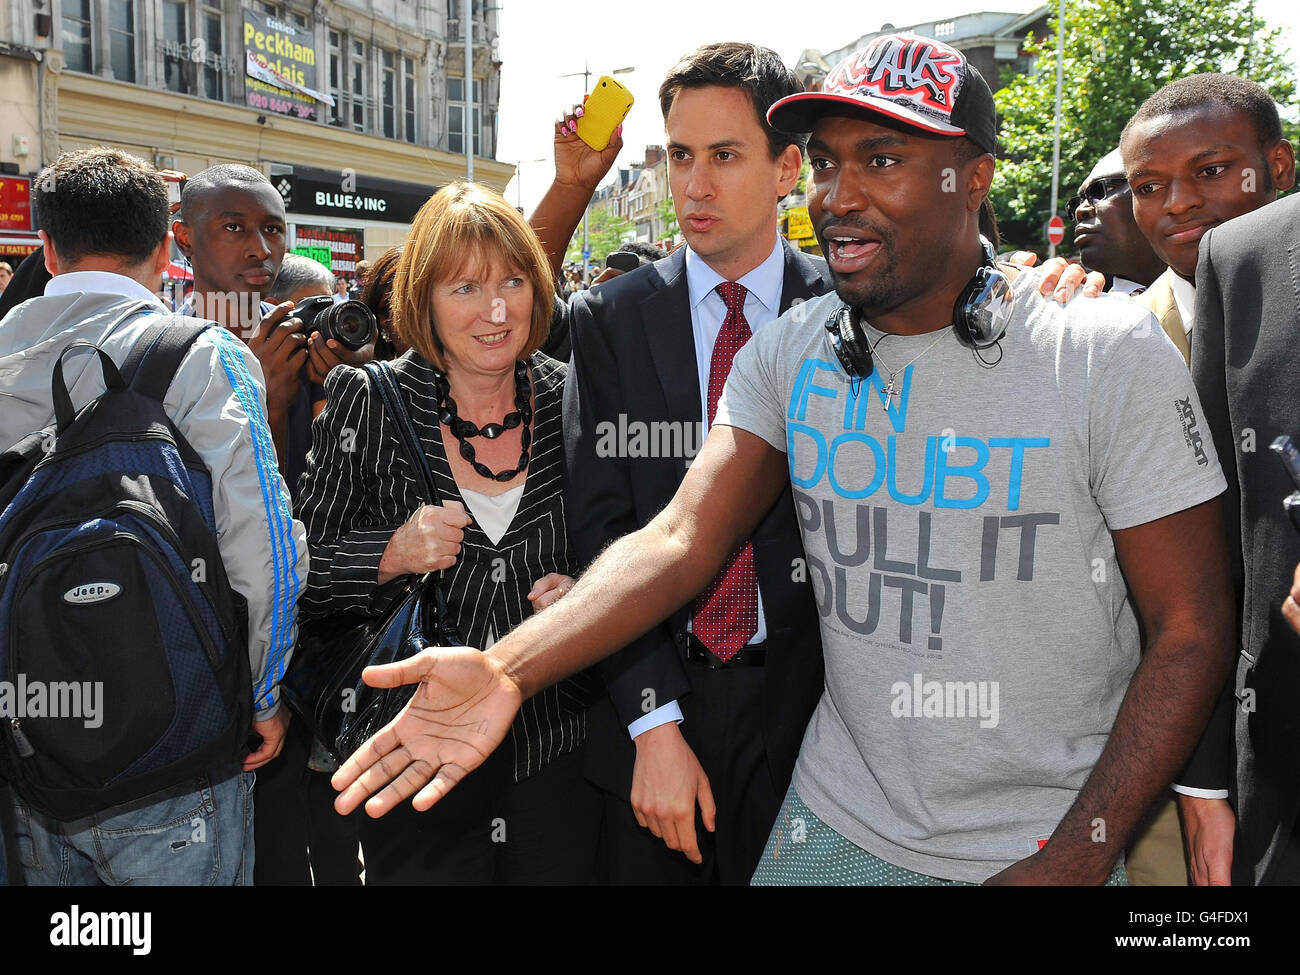 Labour leader Ed Miliband (centre) and Deputy Leader of the Labour Party Harriet Harman speak with Stafford Blake (right) during a visit to Peckham in south London, where rioting took place last night. Stock Photo